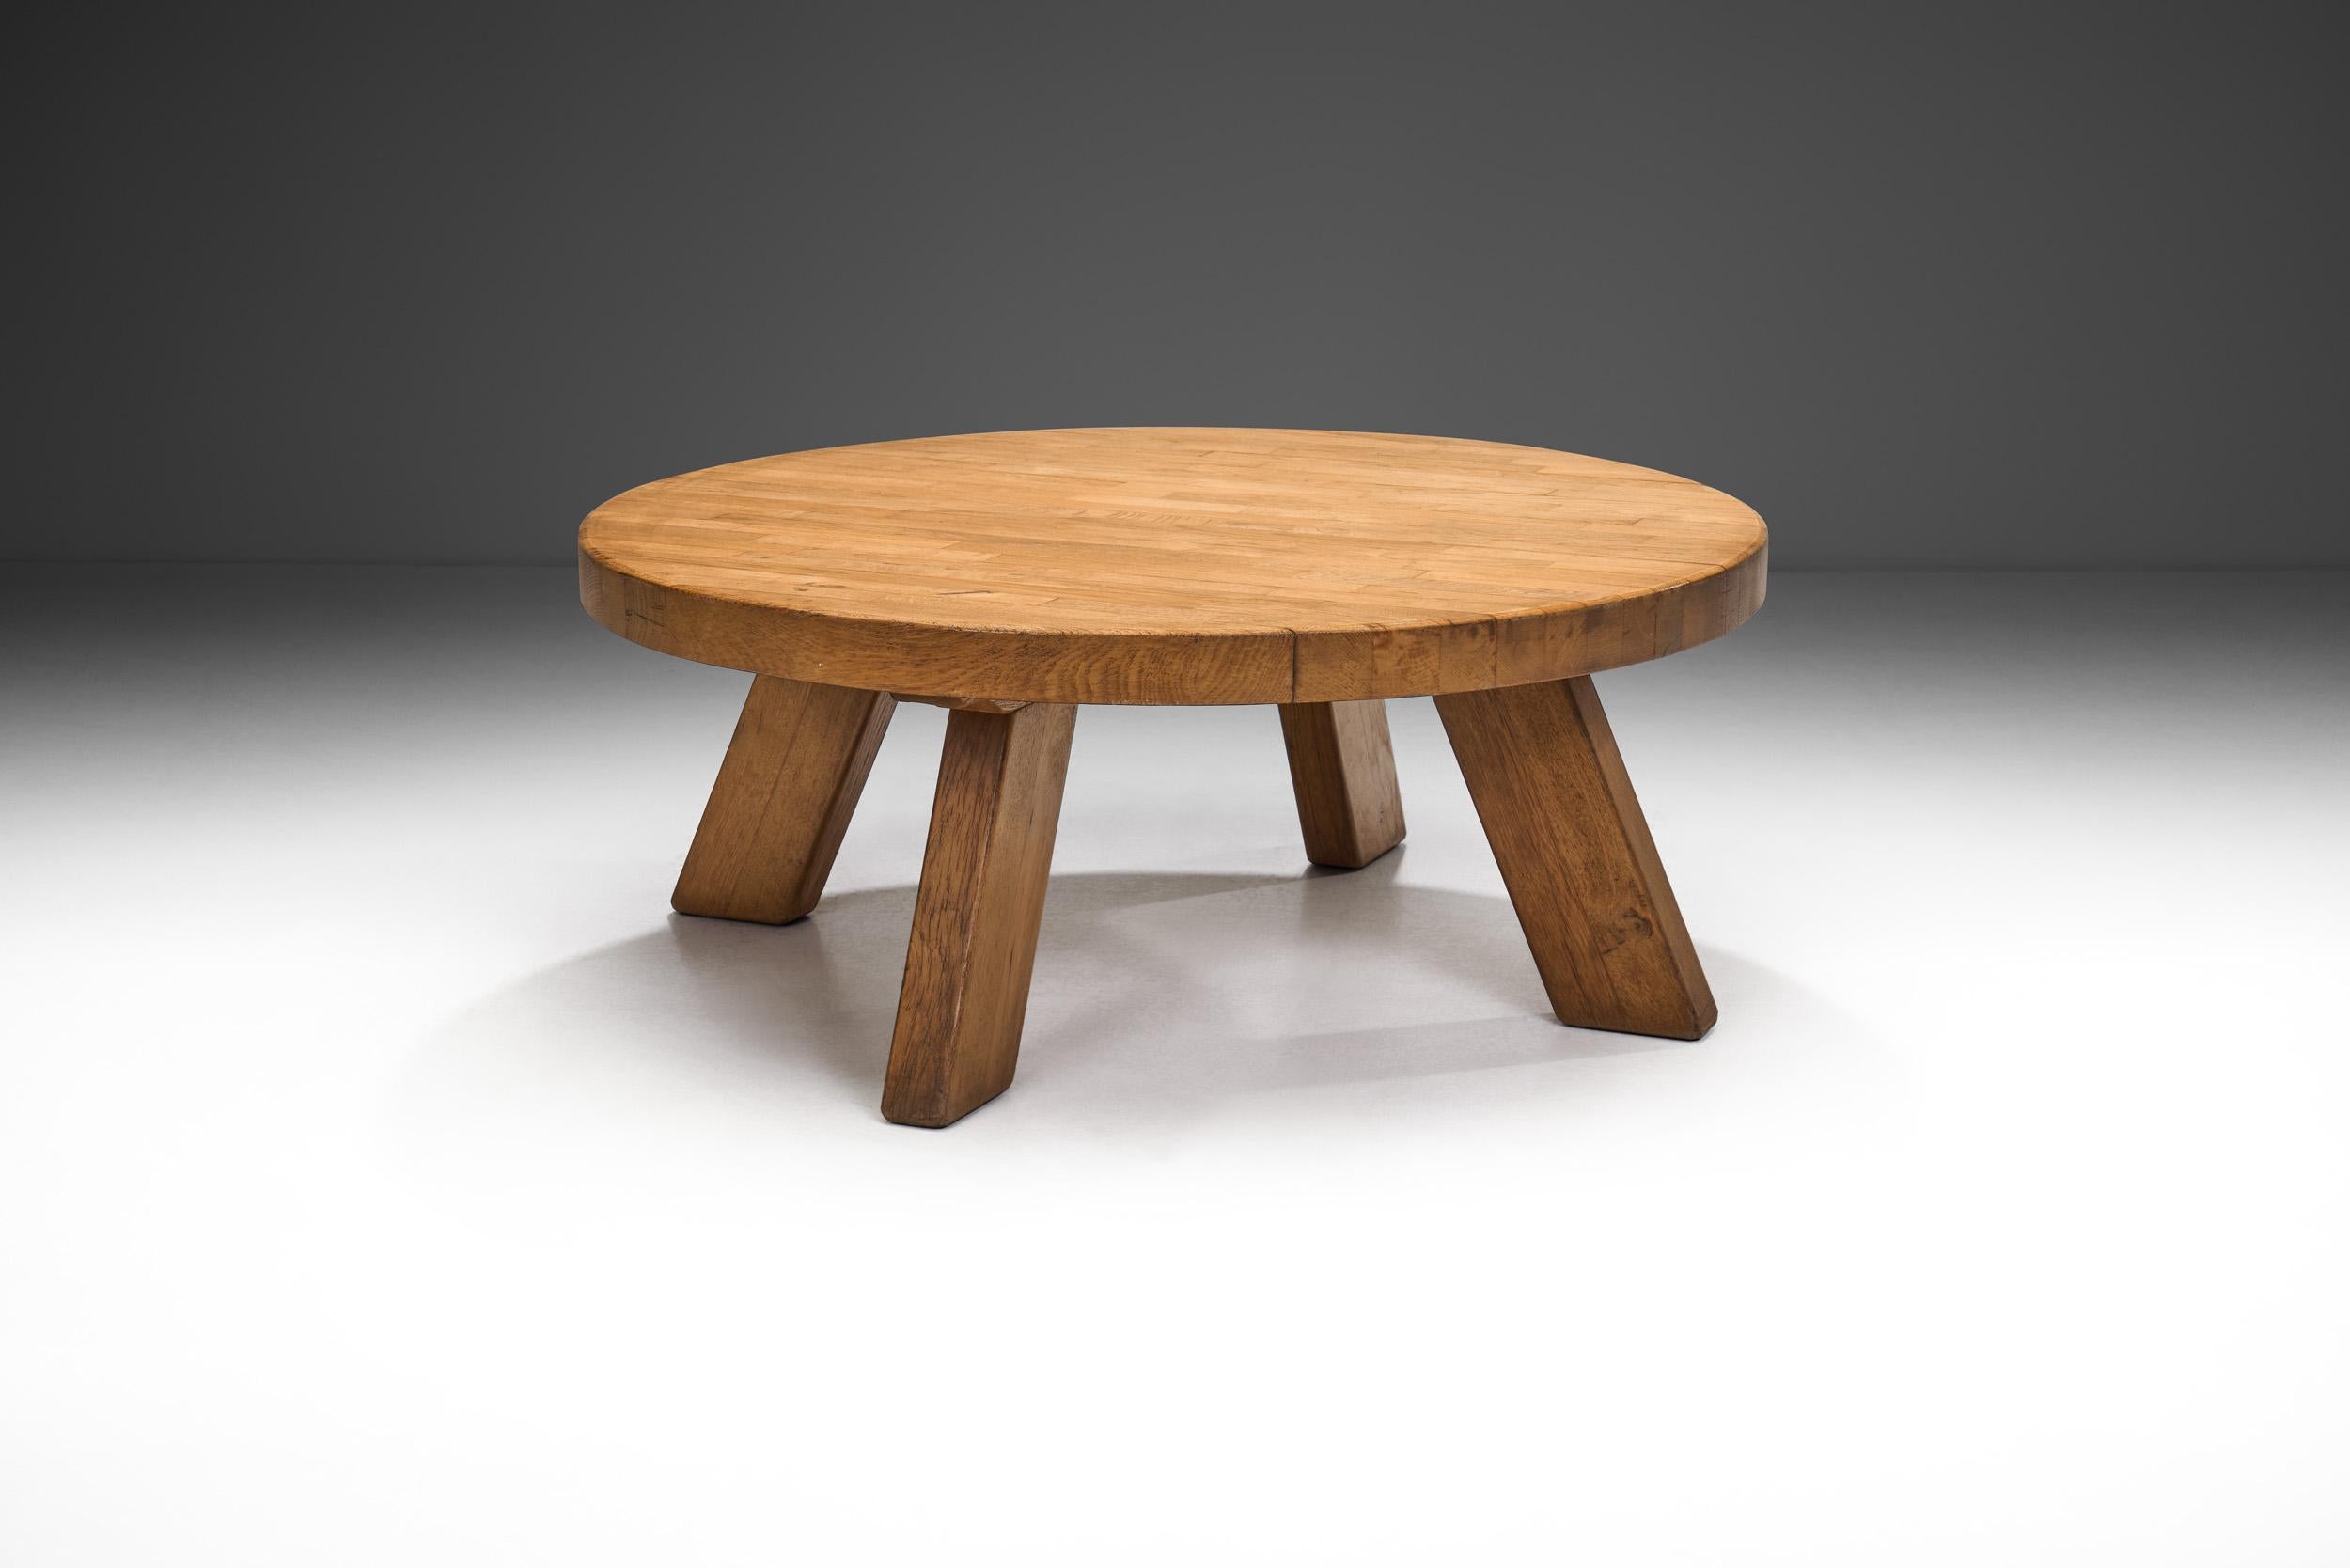 Dutch Solid Oak Round Brutalist Coffee Table, The Netherlands 1970s